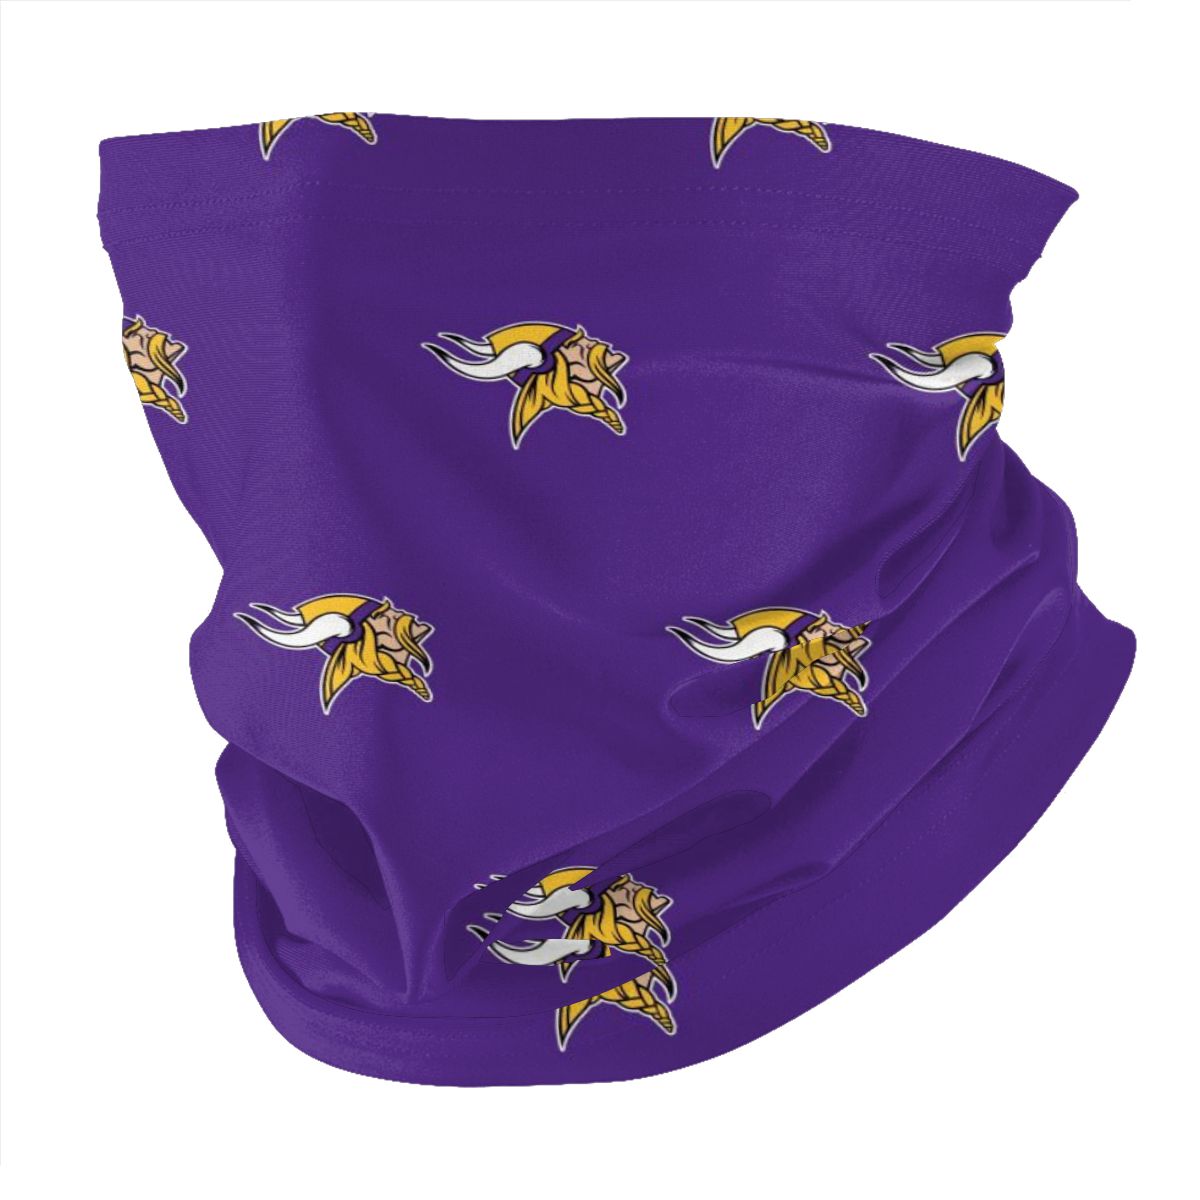 Reusble Mouth Cover Bandanas Minnesota Vikings Variety Head Scarf Face Mask With PM 2.5 Filter